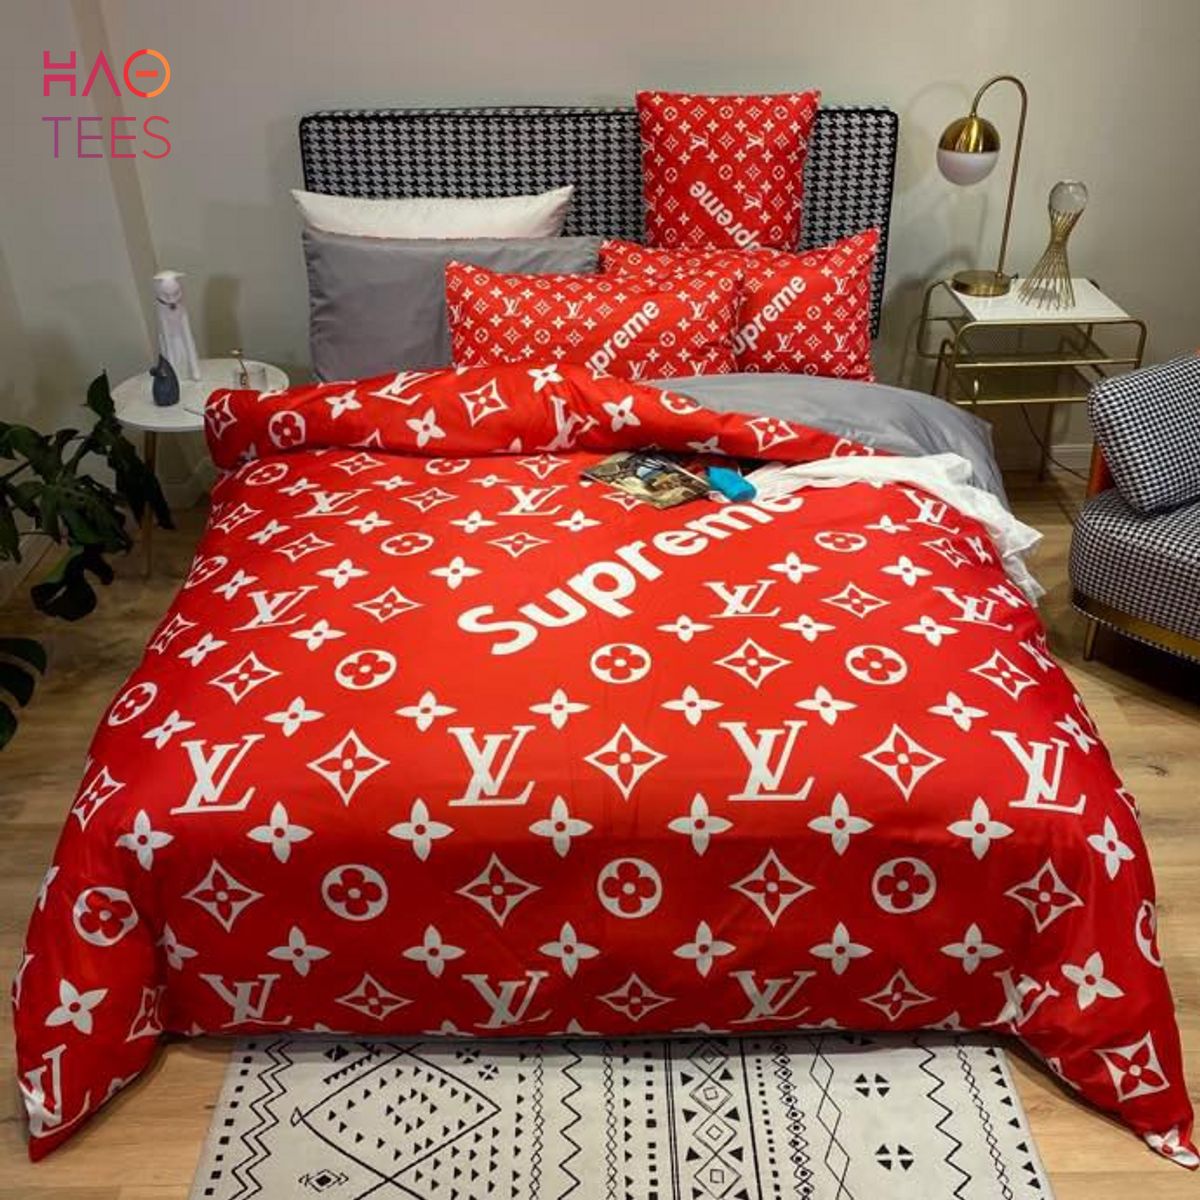 Louis Vuitton red cover bedding set • Kybershop